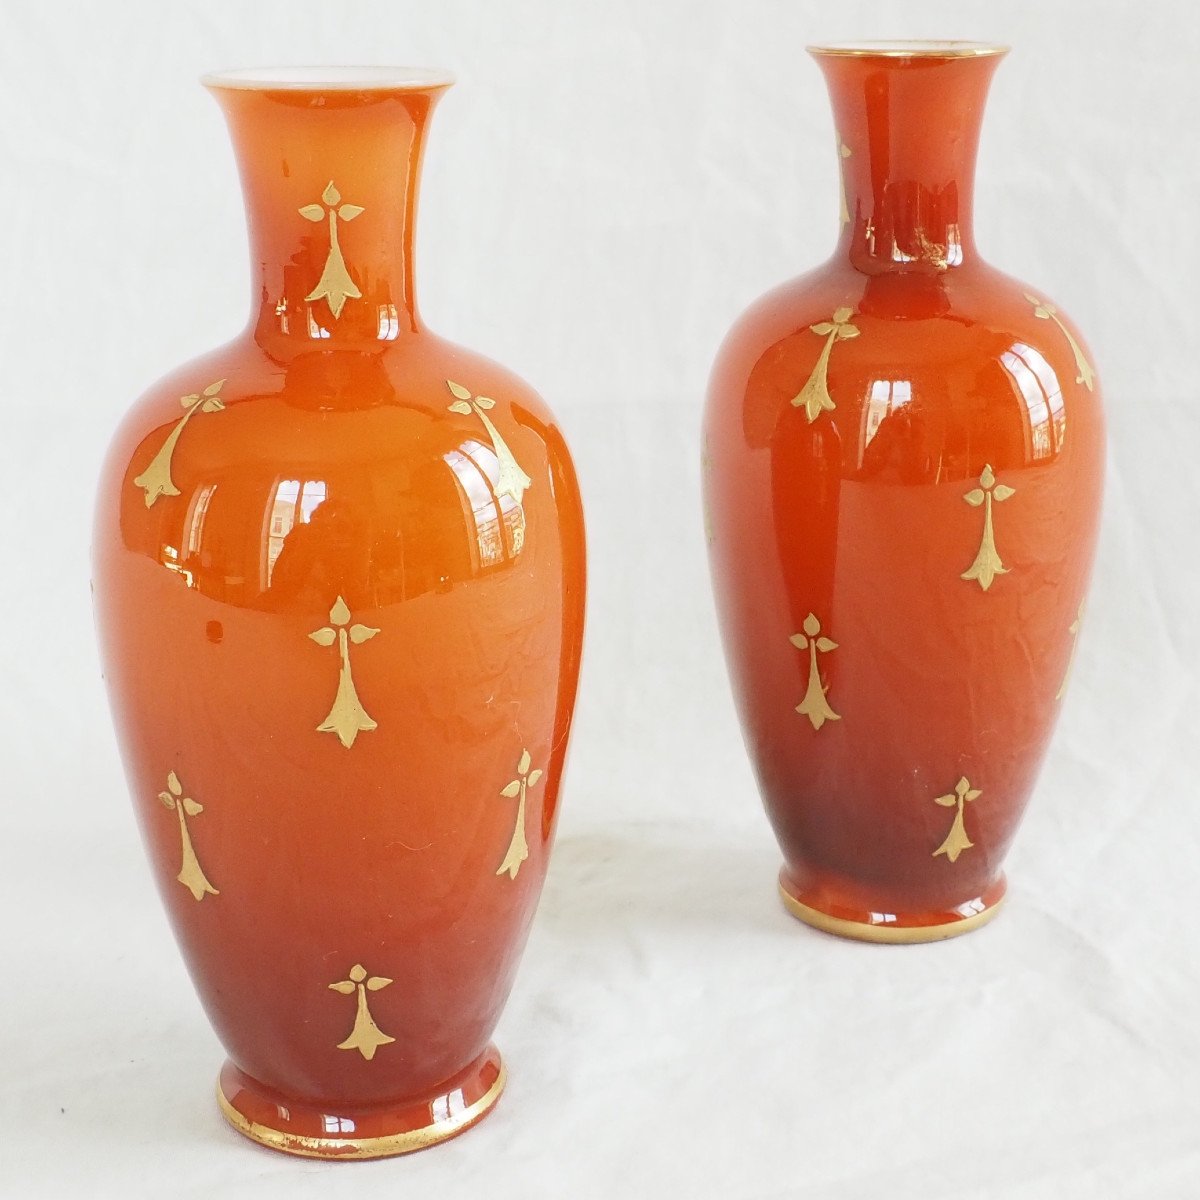 Baccarat - Pair Of Orange And Gold Opaline Vases - 1900 Period-photo-1